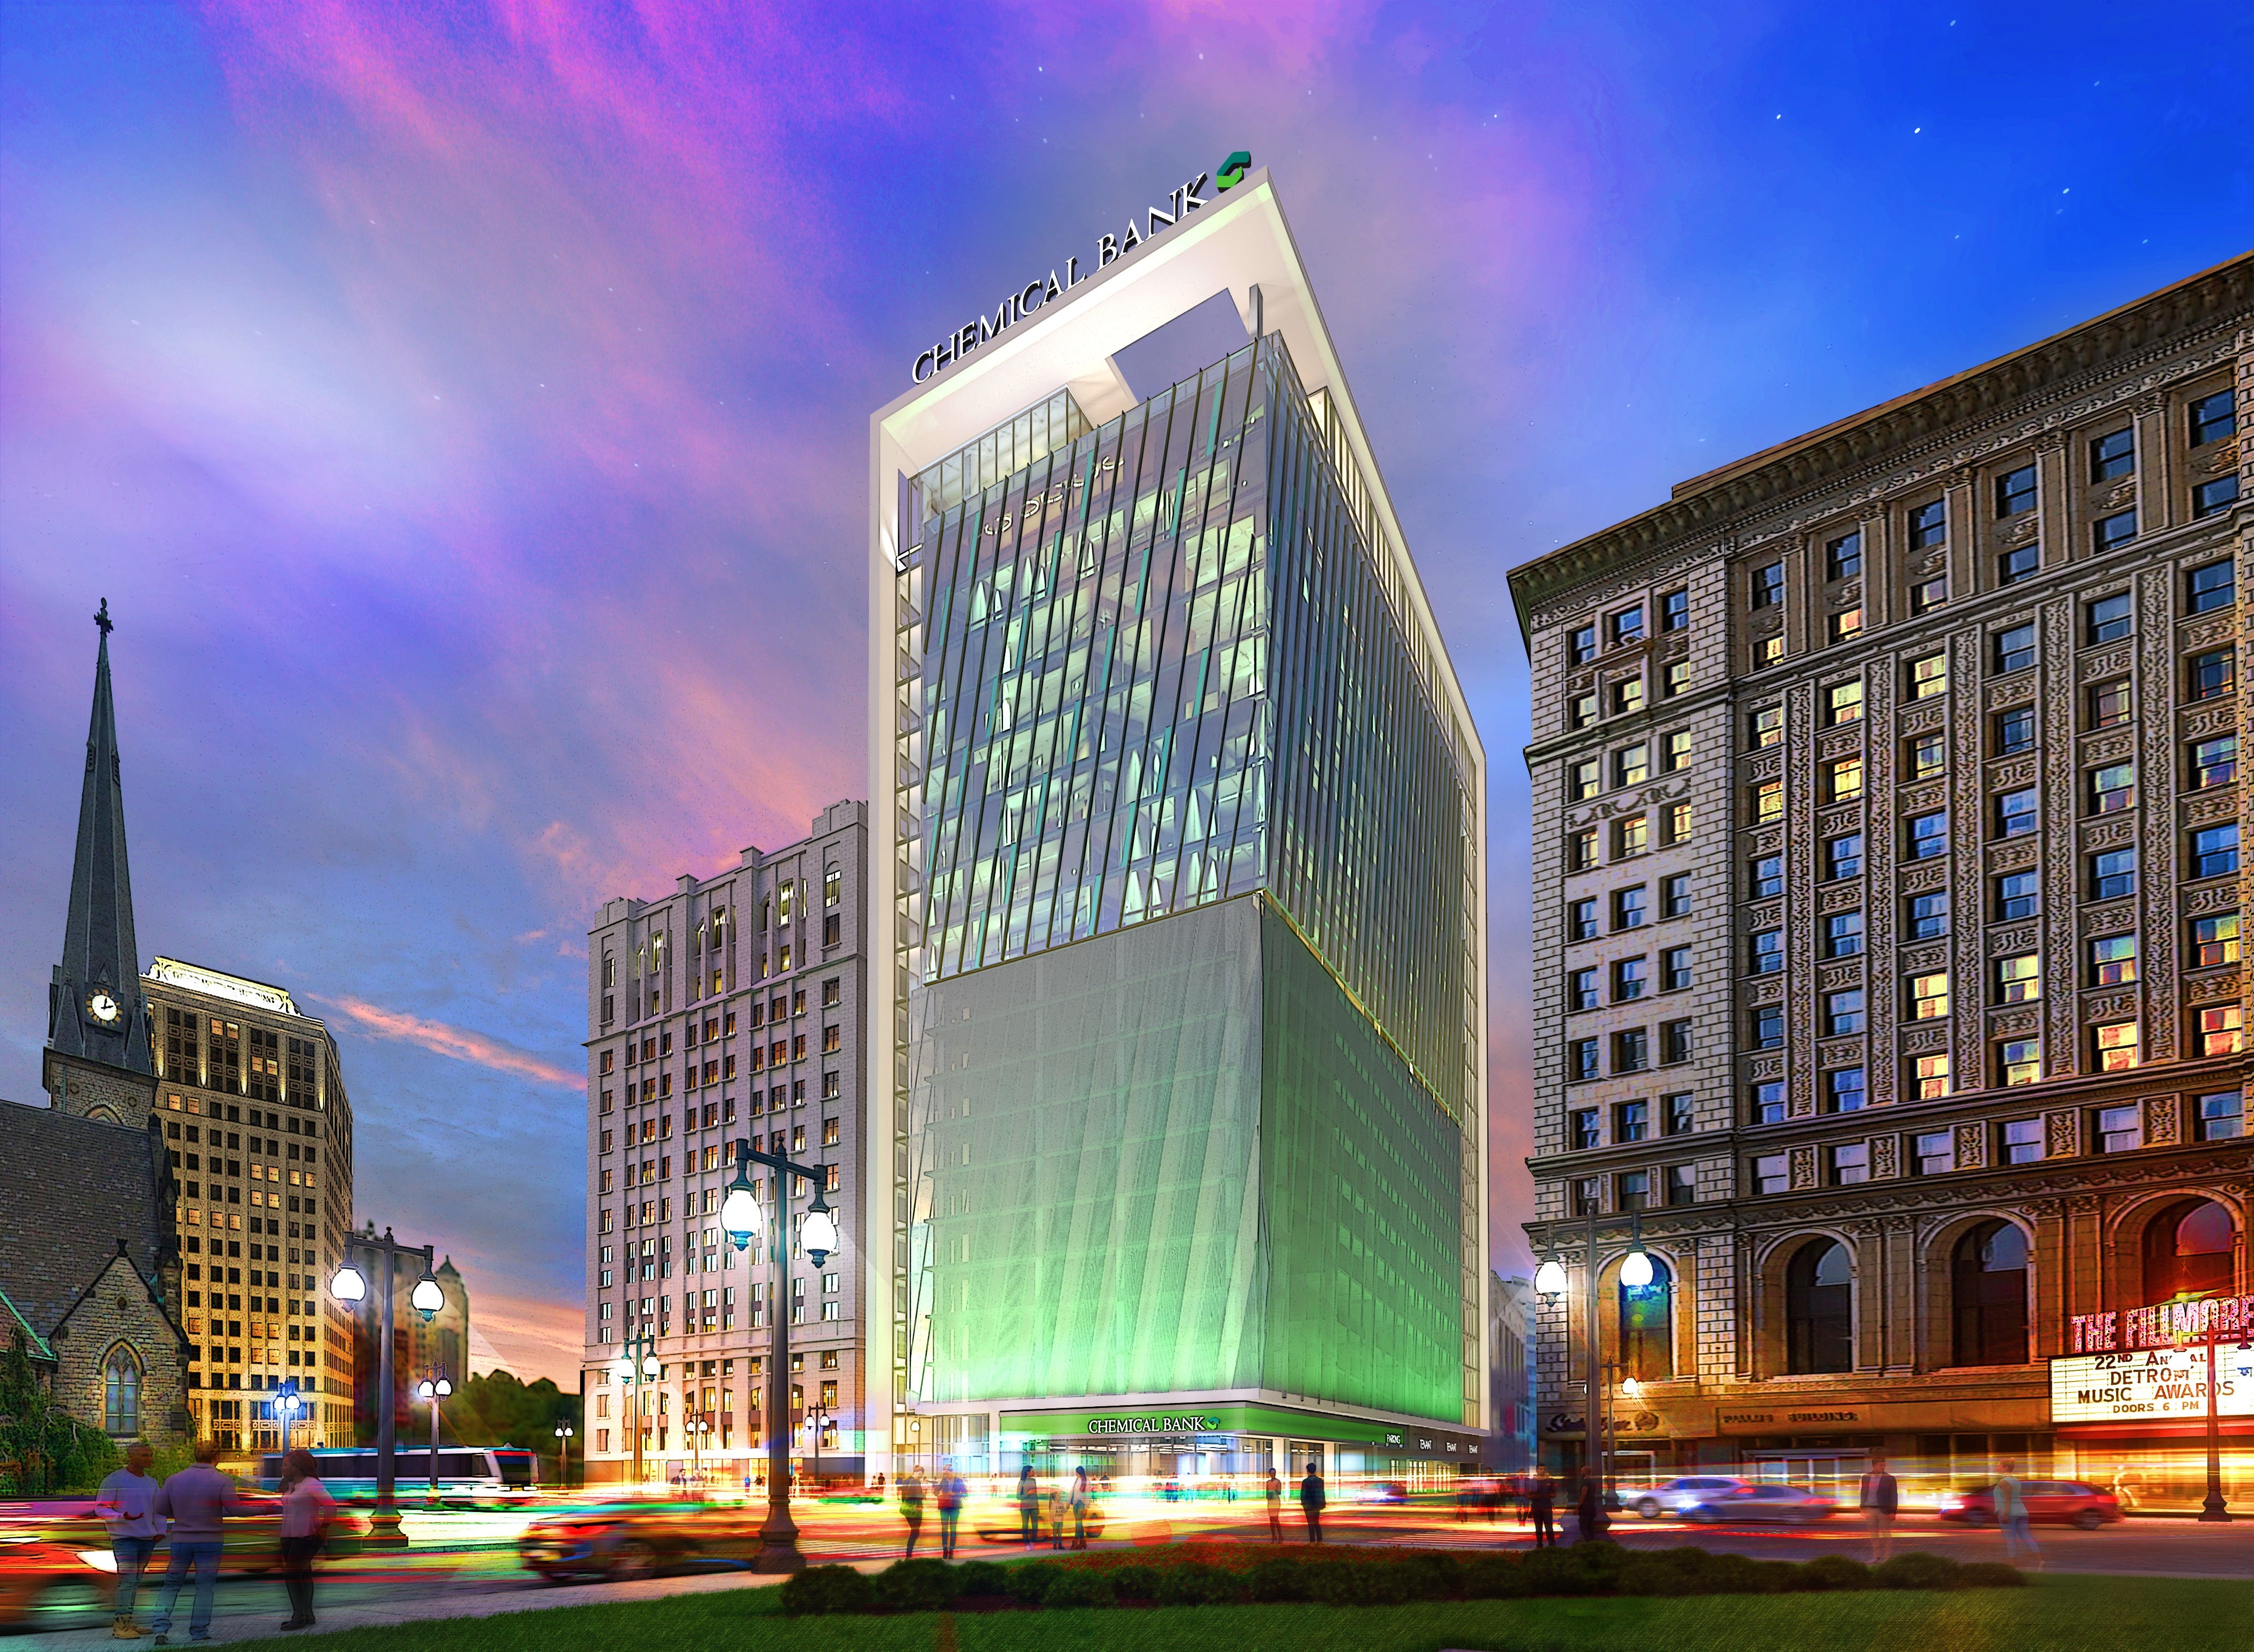 Rendering of a skyscraper with green glass windows and “Chemical Bank” written in block letters